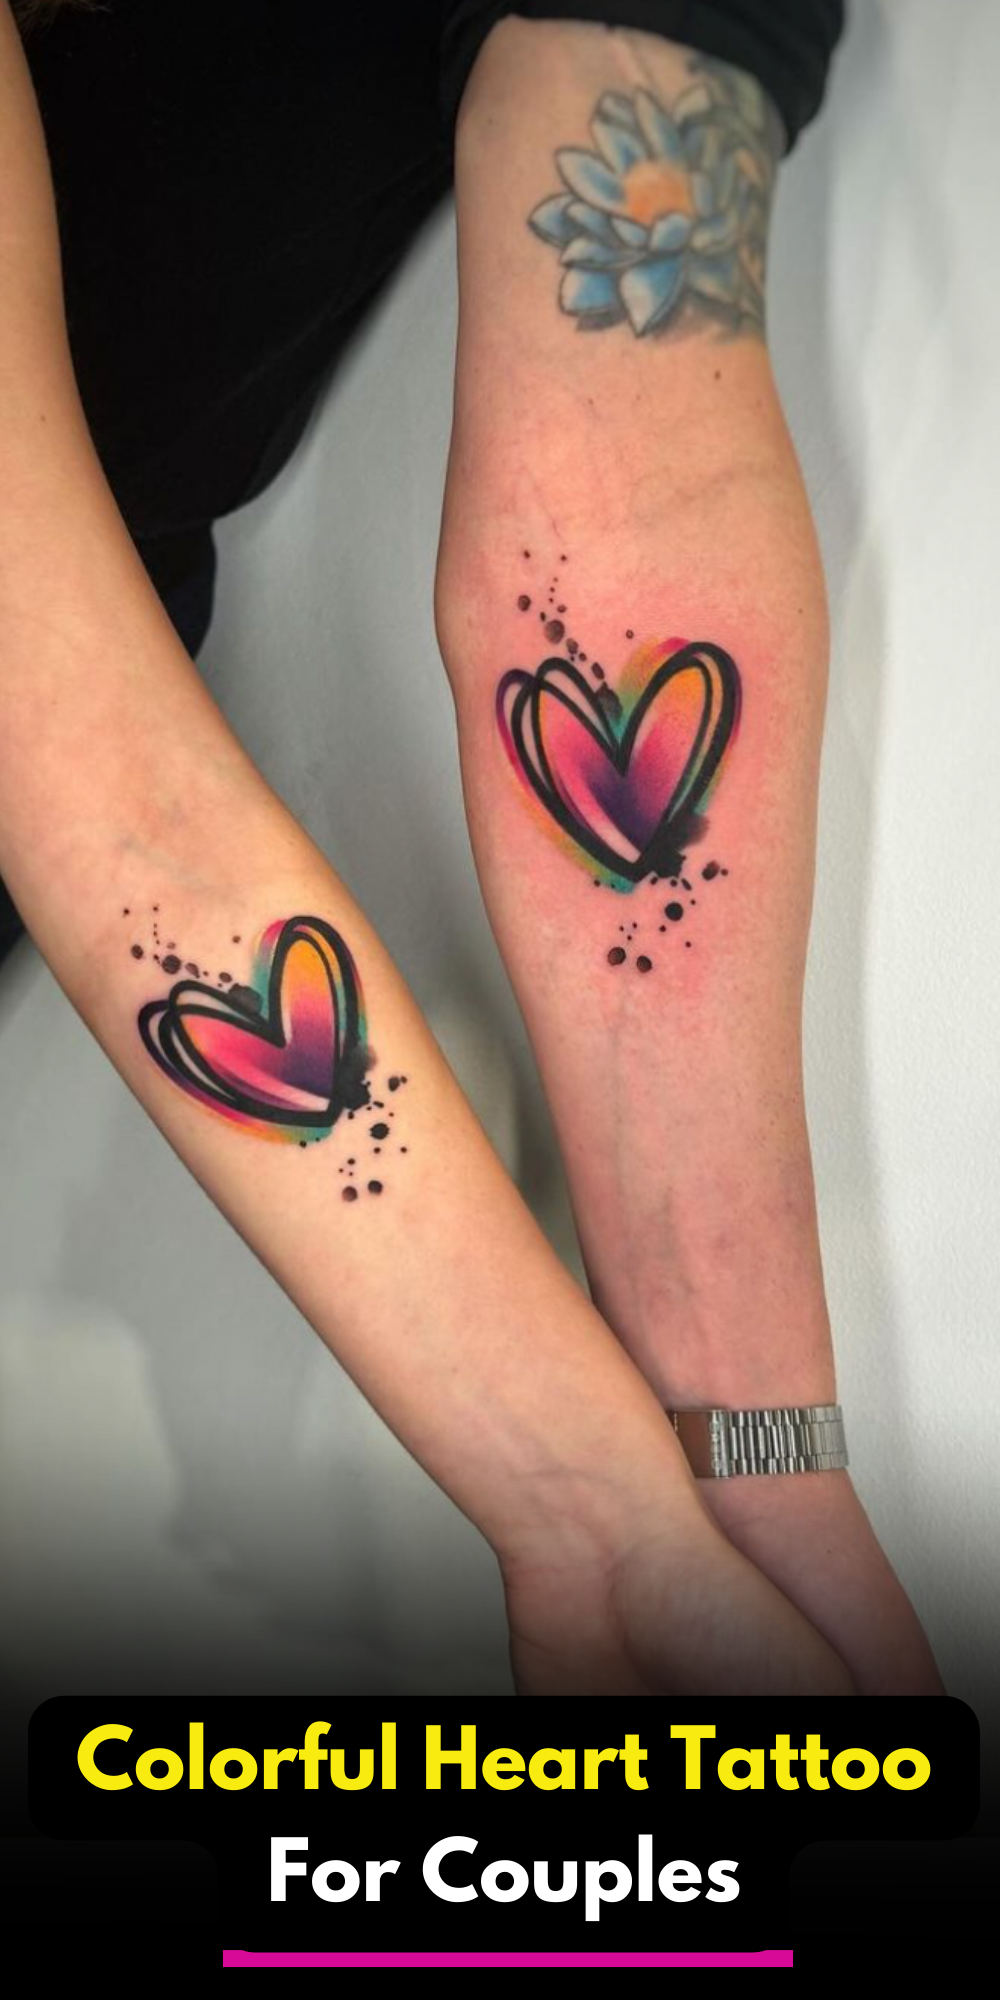 colorful-heart-tattoo-for-couples